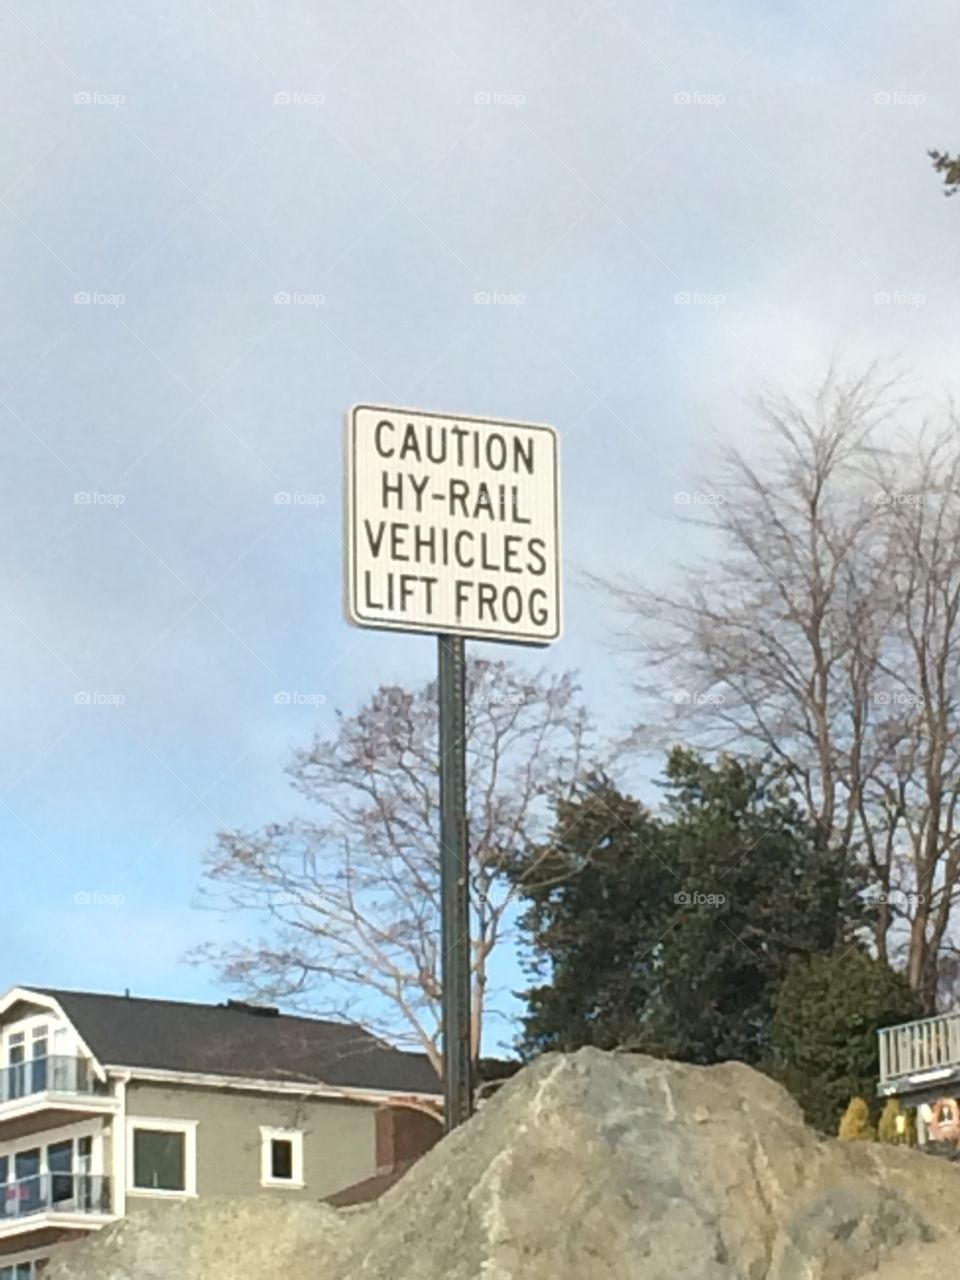 A funny sign seen on a rail road.